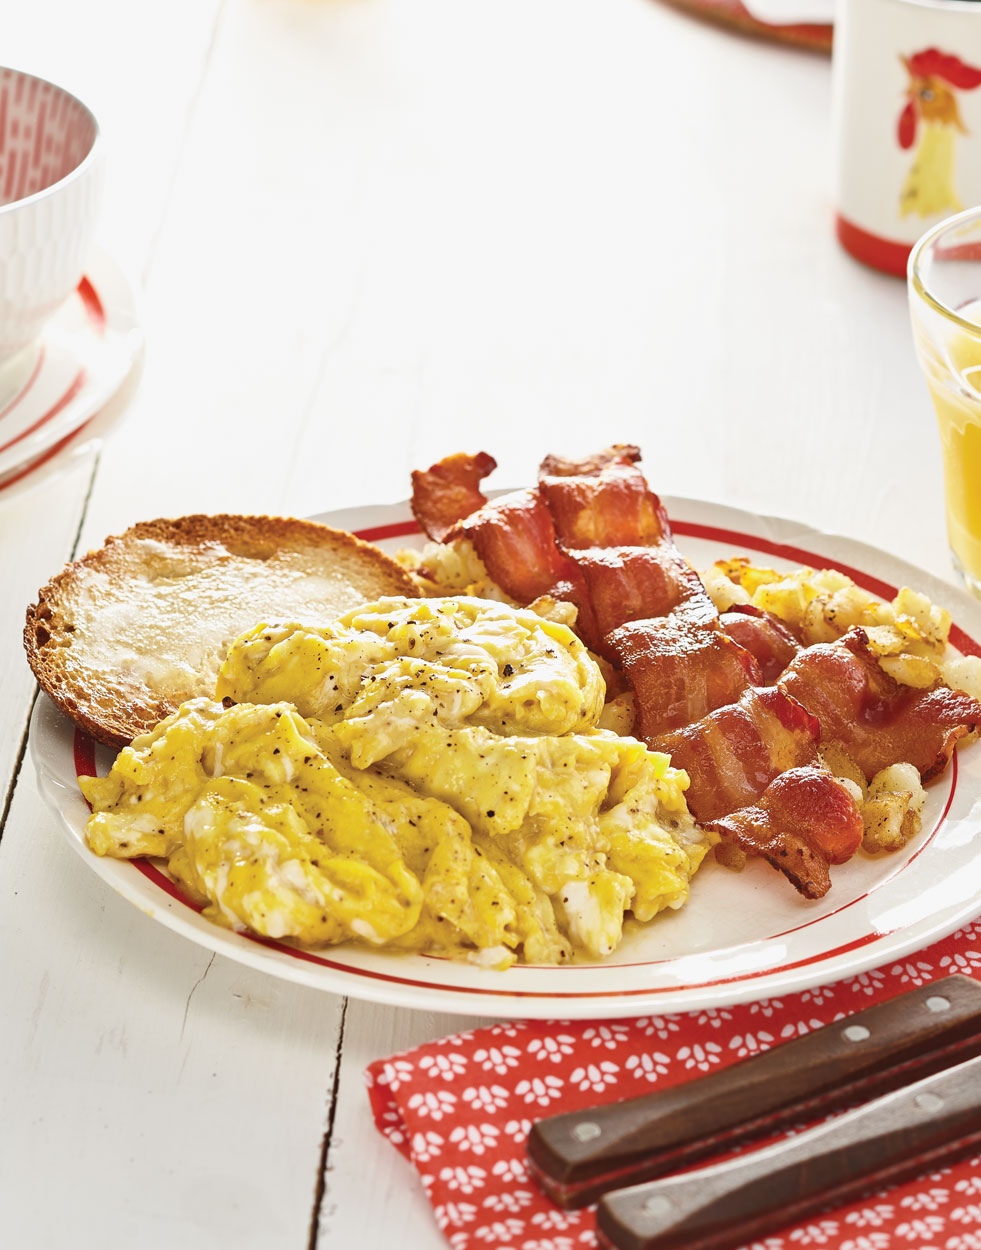 American-Style Large Curd Scrambled Eggs